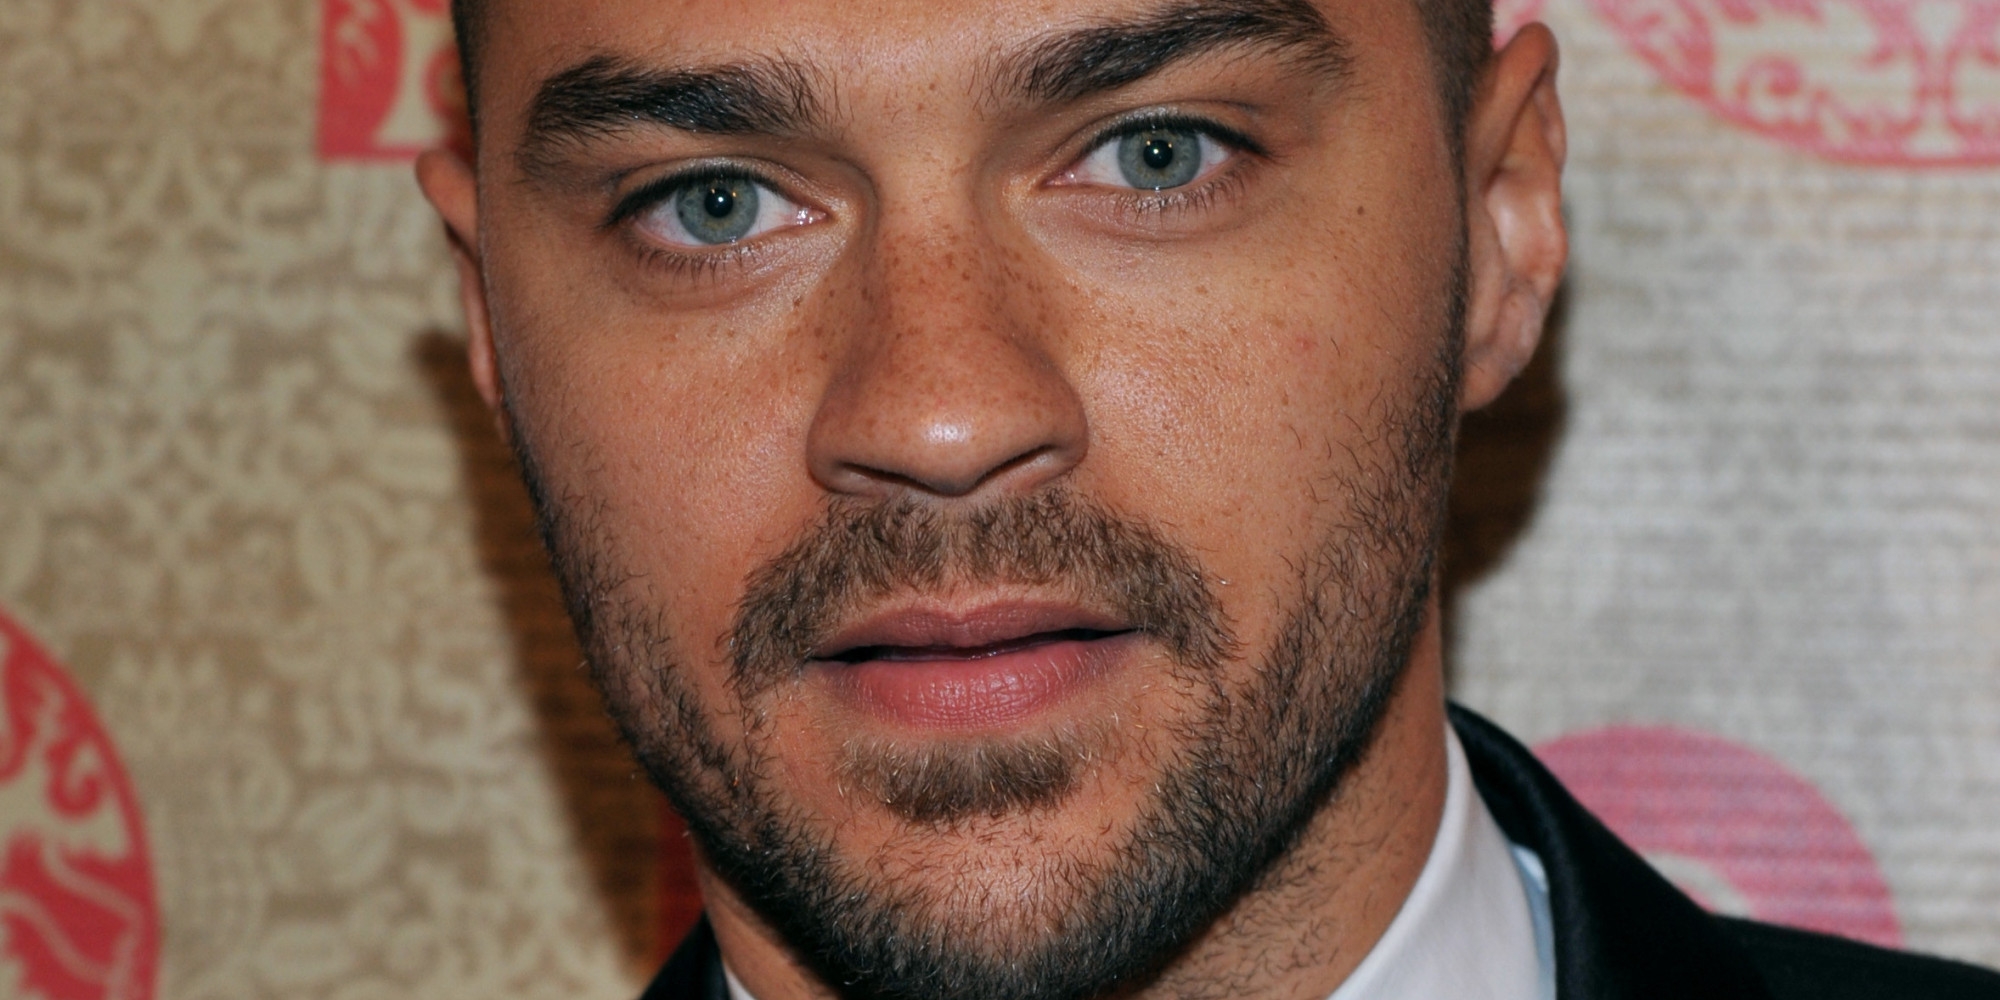 Should Jesse Williams be fired from Grey’s Anatomy?